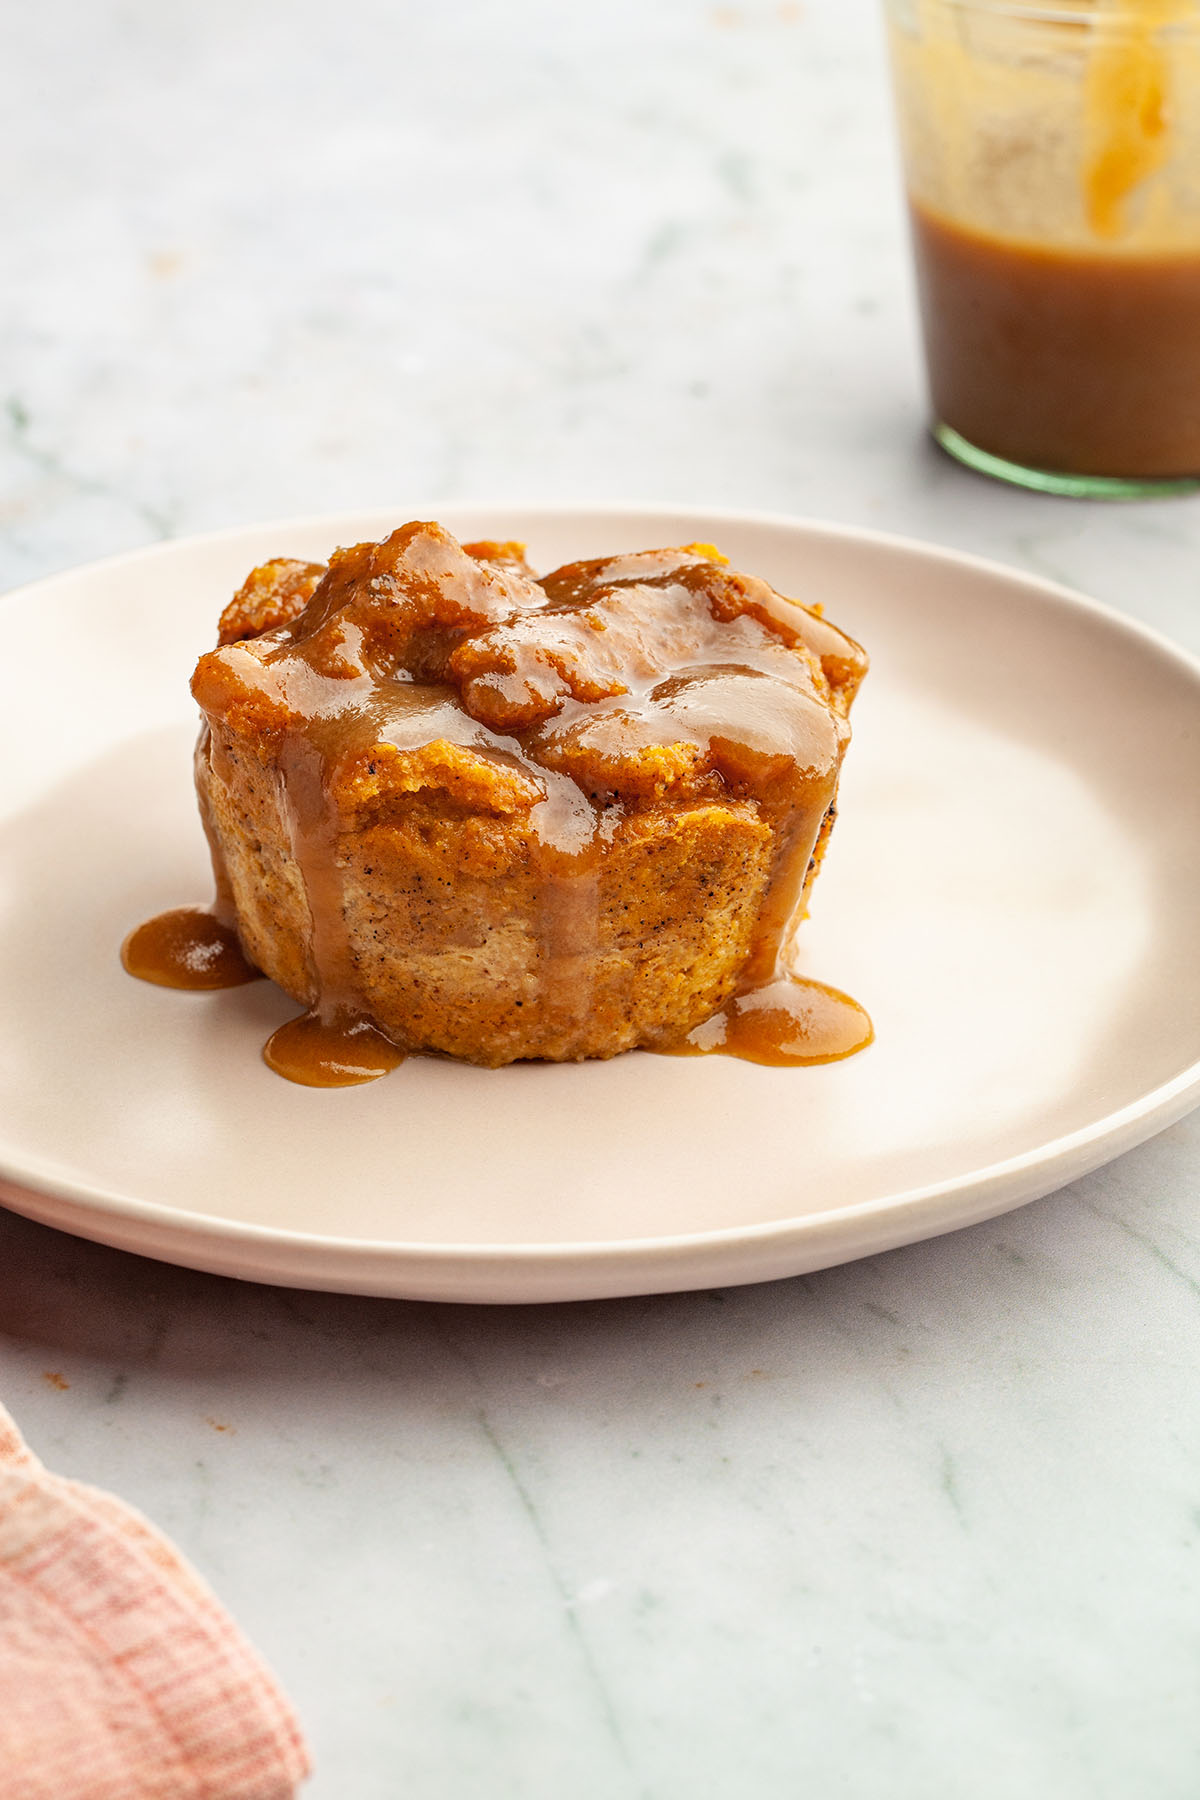 A serving of pumpkin bread pudding on a plate, topped with butterscotch sauce.